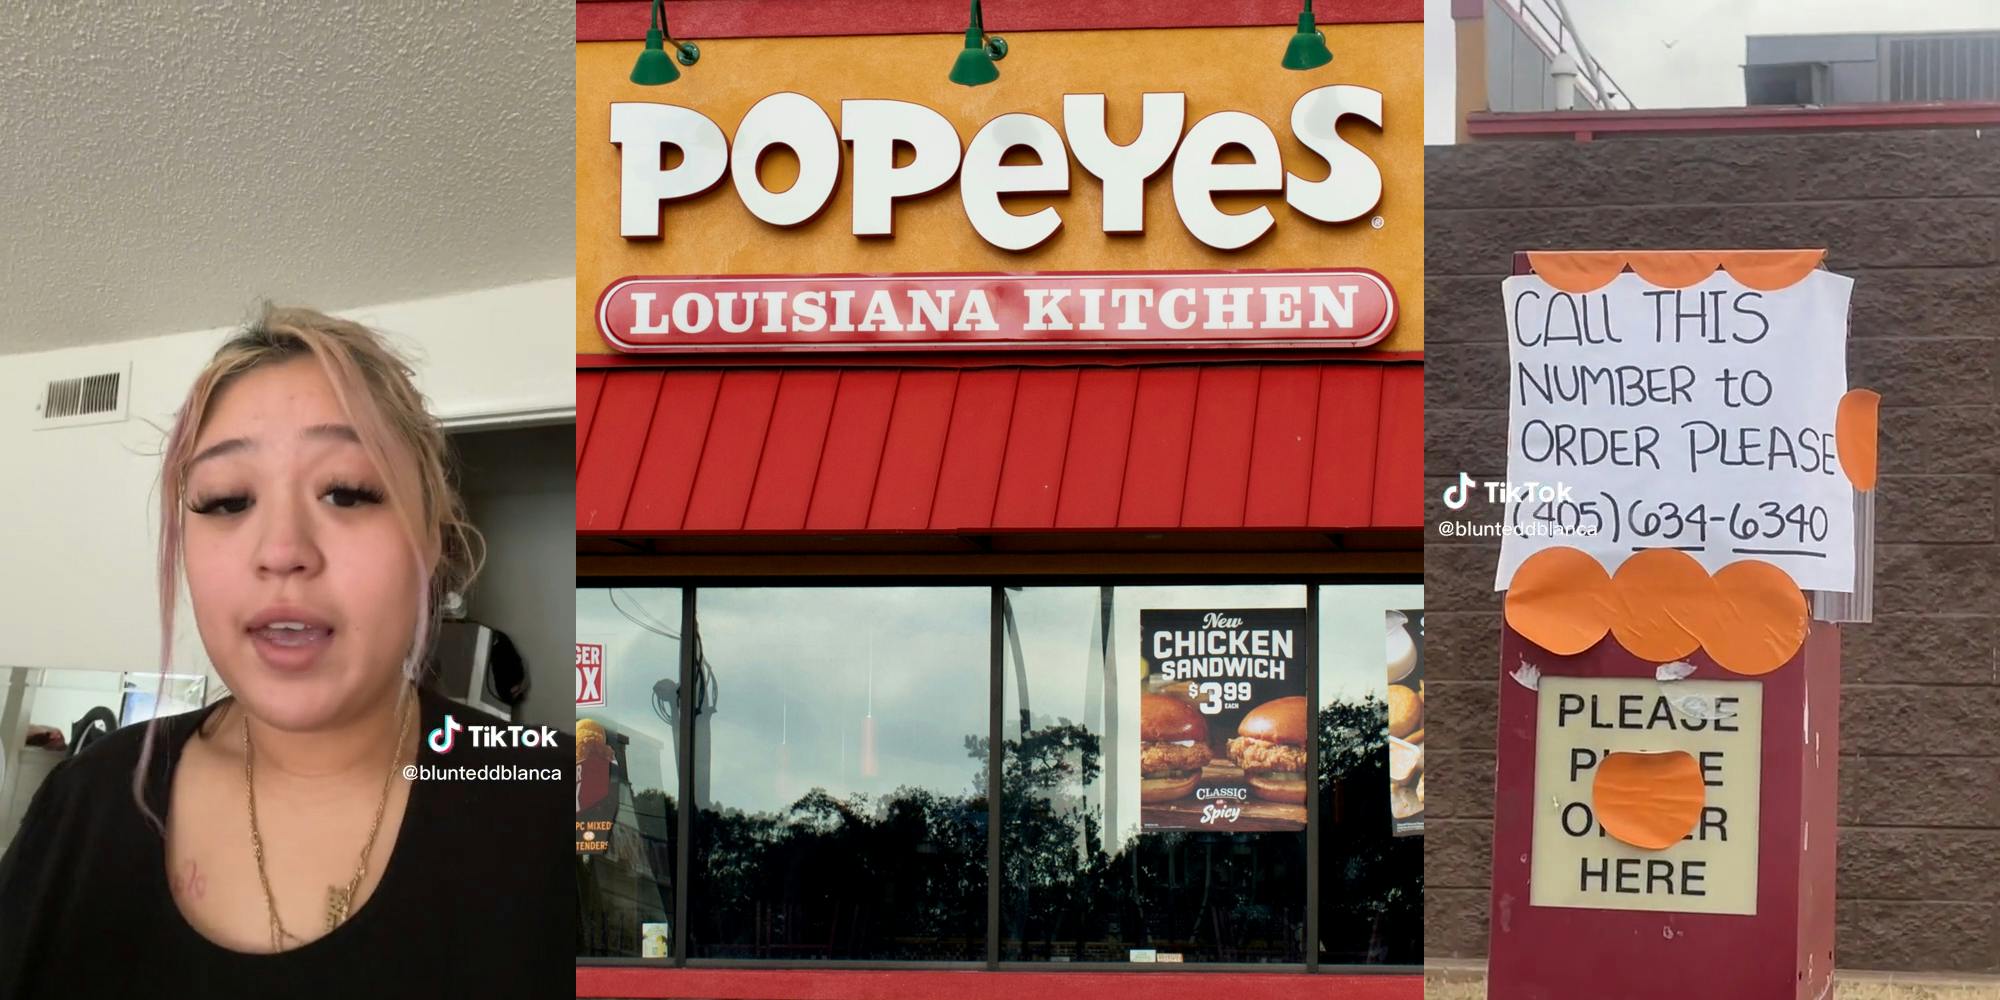 young woman (l) Popeye's Louisiana Kitchen (c) drive thru speaker with sign taped to it that reads "Call this number to order please (405) 634-6340 (r)